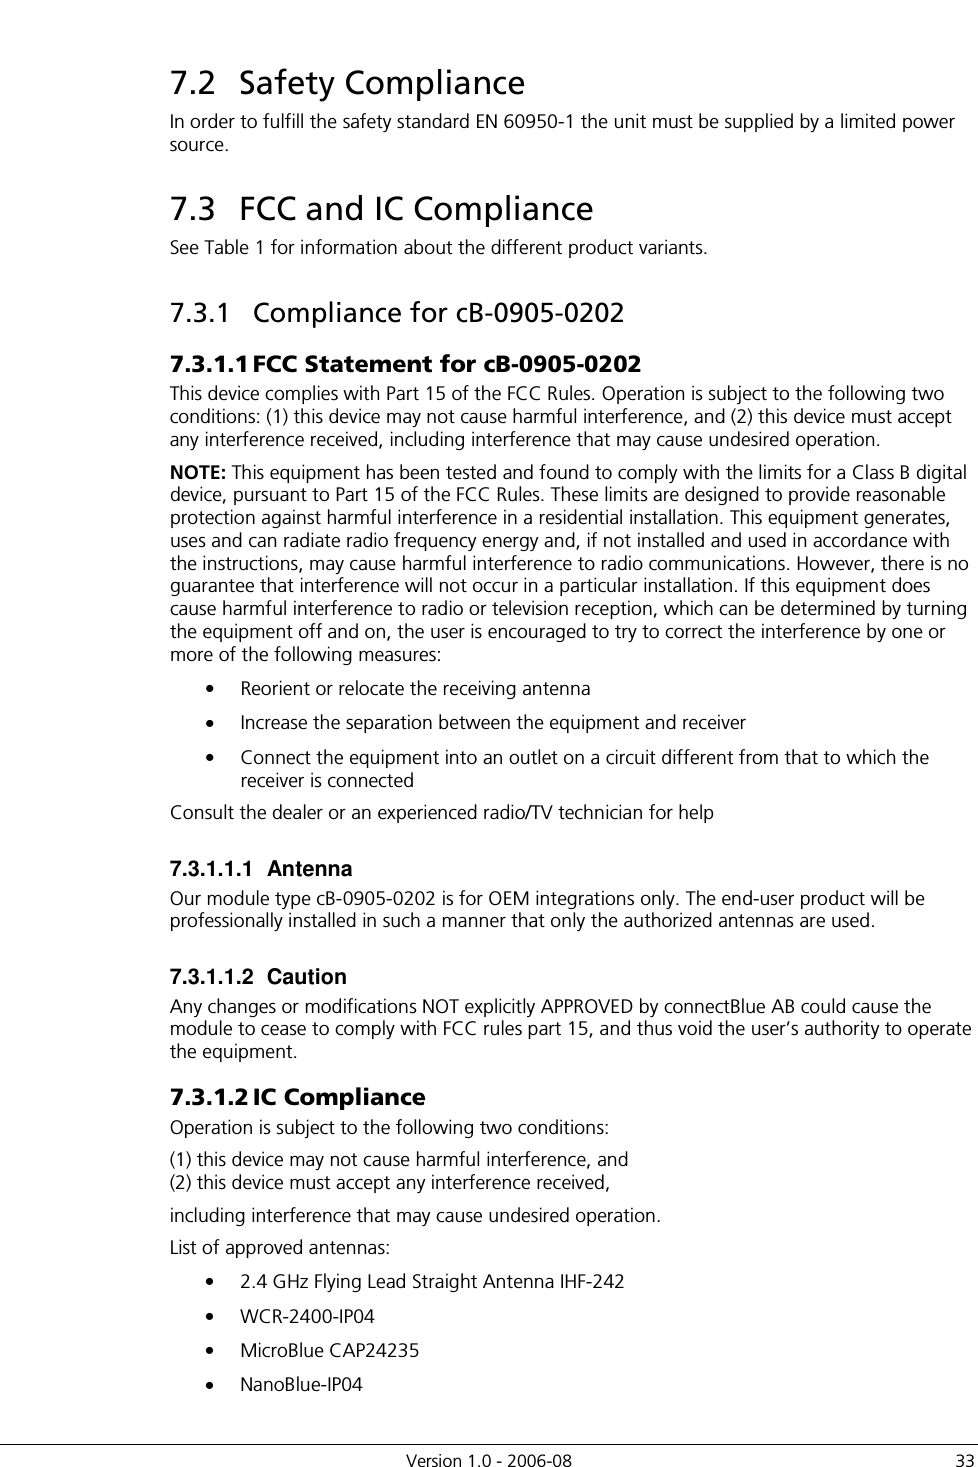          Version 1.0 - 2006-08  33 7.2  Safety Compliance In order to fulfill the safety standard EN 60950-1 the unit must be supplied by a limited power source.  7.3  FCC and IC Compliance See Table 1 for information about the different product variants. 7.3.1  Compliance for cB-0905-0202 7.3.1.1 FCC Statement for cB-0905-0202 This device complies with Part 15 of the FCC Rules. Operation is subject to the following two conditions: (1) this device may not cause harmful interference, and (2) this device must accept any interference received, including interference that may cause undesired operation. NOTE: This equipment has been tested and found to comply with the limits for a Class B digital device, pursuant to Part 15 of the FCC Rules. These limits are designed to provide reasonable protection against harmful interference in a residential installation. This equipment generates, uses and can radiate radio frequency energy and, if not installed and used in accordance with the instructions, may cause harmful interference to radio communications. However, there is no guarantee that interference will not occur in a particular installation. If this equipment does cause harmful interference to radio or television reception, which can be determined by turning the equipment off and on, the user is encouraged to try to correct the interference by one or more of the following measures: •  Reorient or relocate the receiving antenna •  Increase the separation between the equipment and receiver •  Connect the equipment into an outlet on a circuit different from that to which the receiver is connected Consult the dealer or an experienced radio/TV technician for help 7.3.1.1.1  Antenna Our module type cB-0905-0202 is for OEM integrations only. The end-user product will be professionally installed in such a manner that only the authorized antennas are used. 7.3.1.1.2  Caution Any changes or modifications NOT explicitly APPROVED by connectBlue AB could cause the module to cease to comply with FCC rules part 15, and thus void the user’s authority to operate the equipment. 7.3.1.2 IC Compliance Operation is subject to the following two conditions:  (1) this device may not cause harmful interference, and (2) this device must accept any interference received, including interference that may cause undesired operation. List of approved antennas: •  2.4 GHz Flying Lead Straight Antenna IHF-242 •  WCR-2400-IP04 •  MicroBlue CAP24235 •  NanoBlue-IP04 